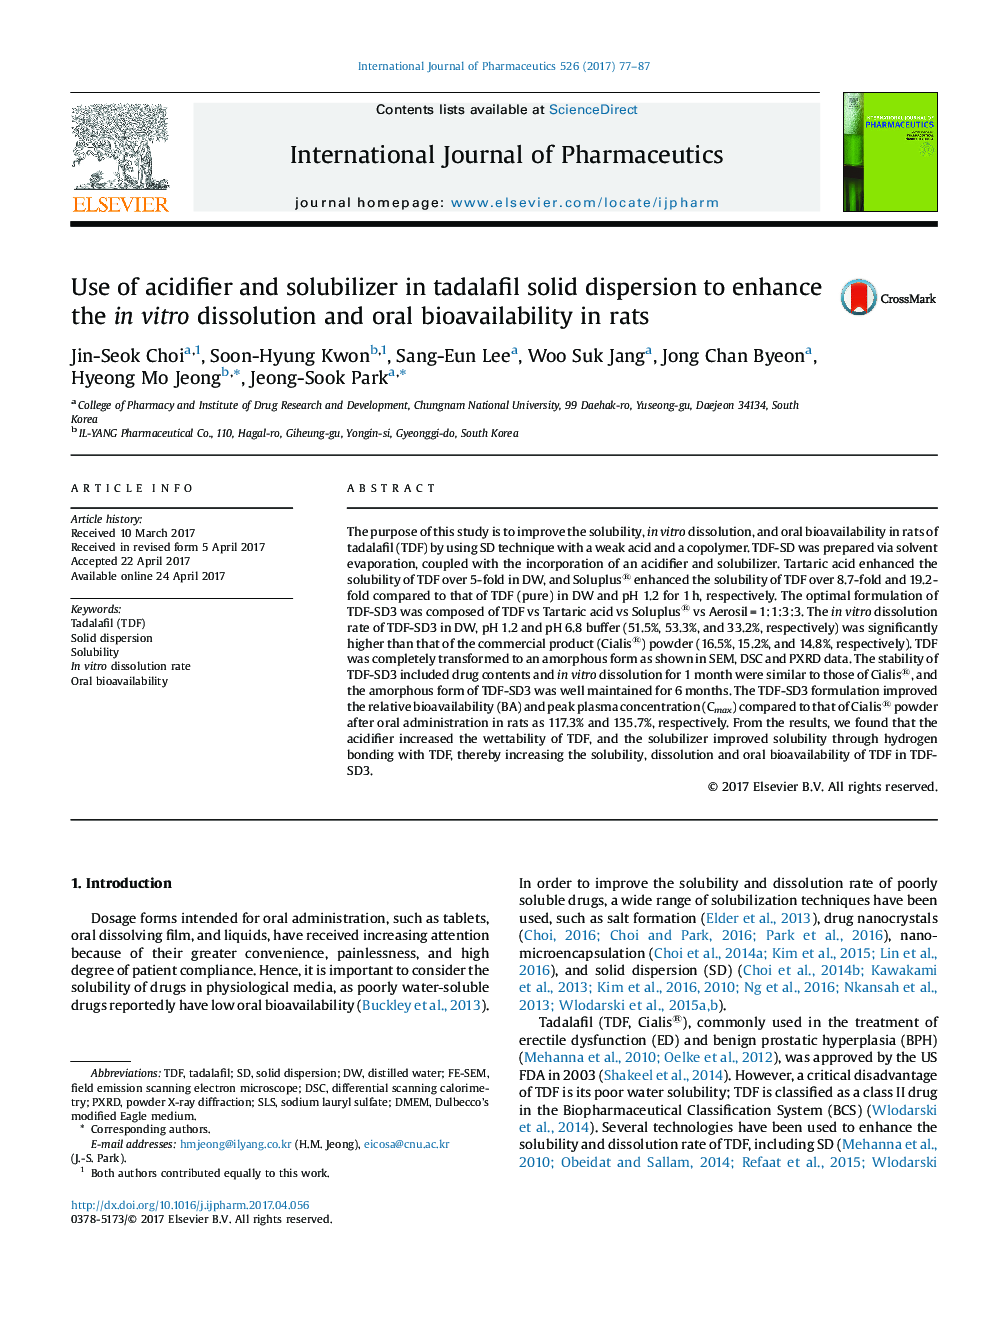 Use of acidifier and solubilizer in tadalafil solid dispersion to enhance the in vitro dissolution and oral bioavailability in rats